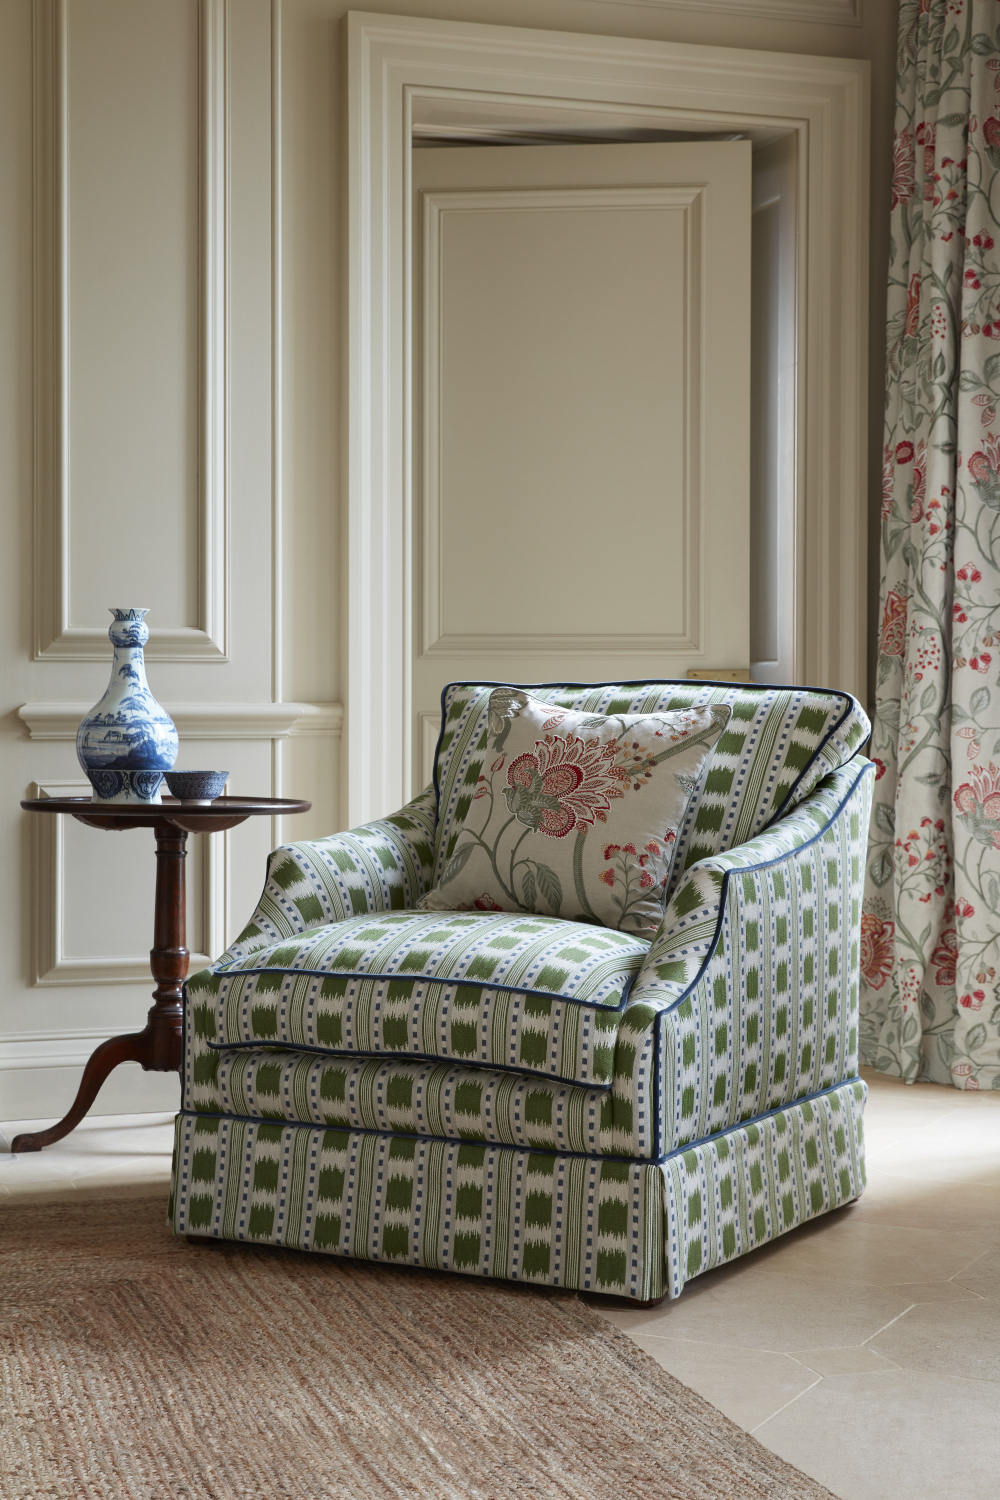 Image of upholstered armchair in greens and blues.